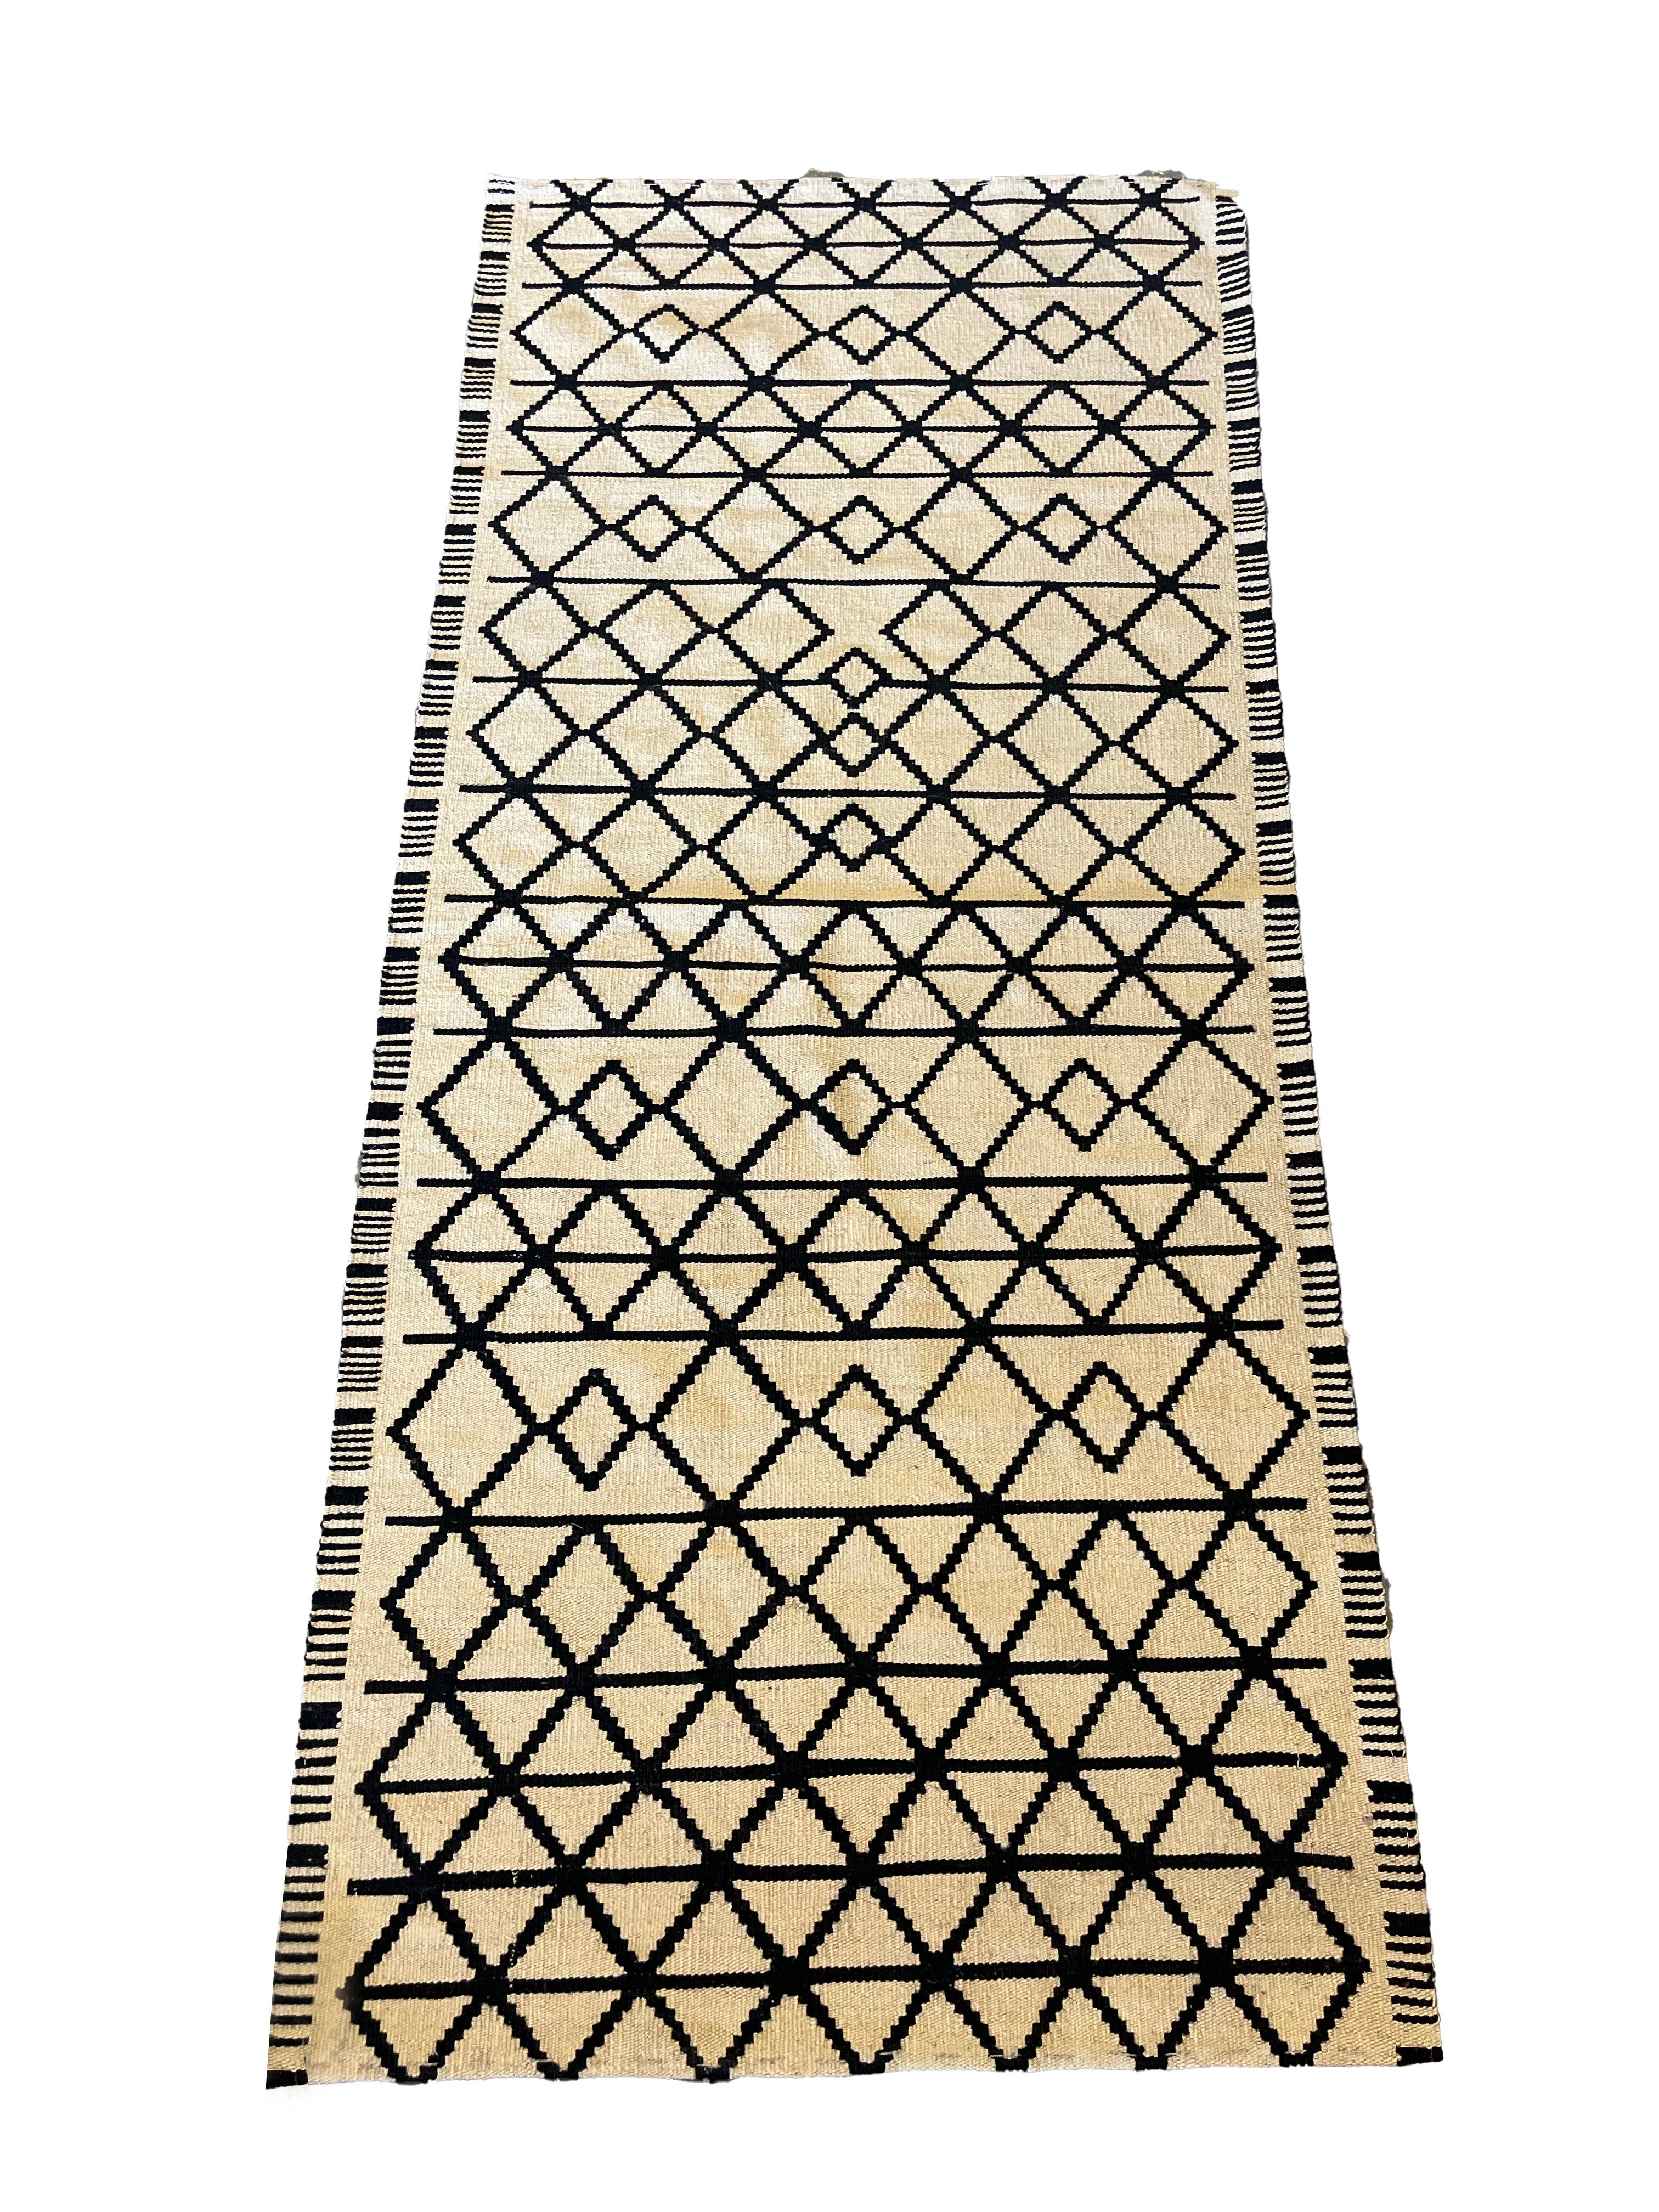 This modern handwoven wool kilim is a great example of handwoven carpets from Afghanistan. The design is a unique Scandinavian style pattern, simple yet beautiful this rug is sure to make a great accent rug for any room in your home. Easily style